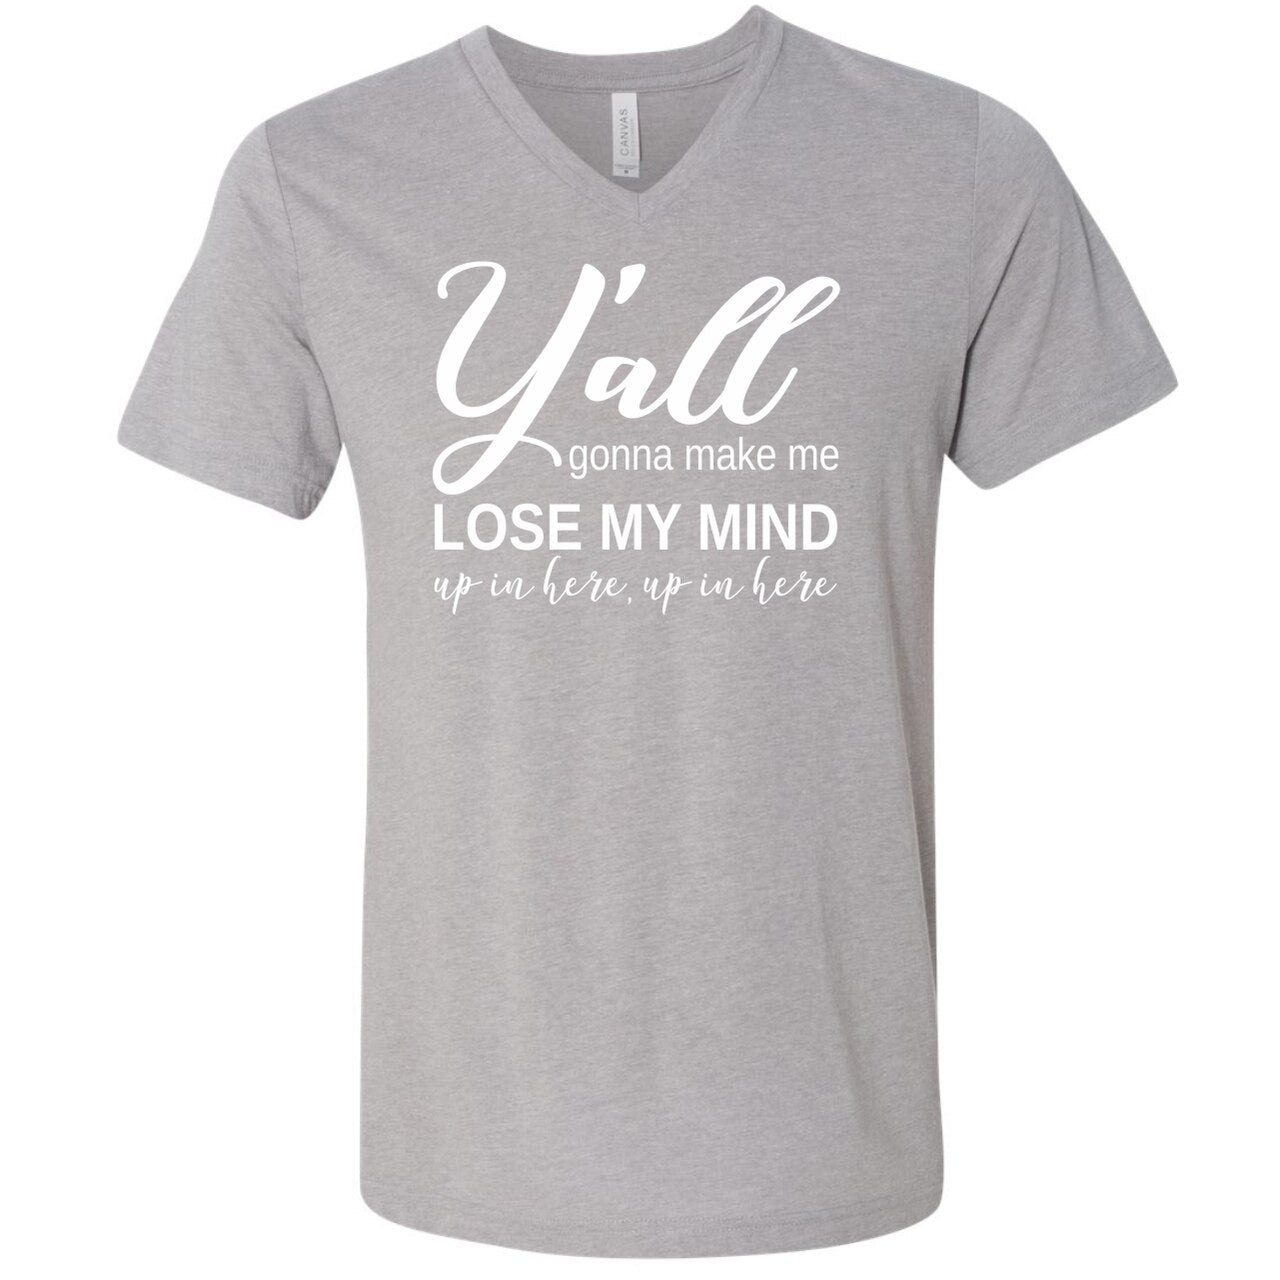 Y'all Gonna Make Me Lose My Mind... - V-Neck Tee - The Graphic Tee